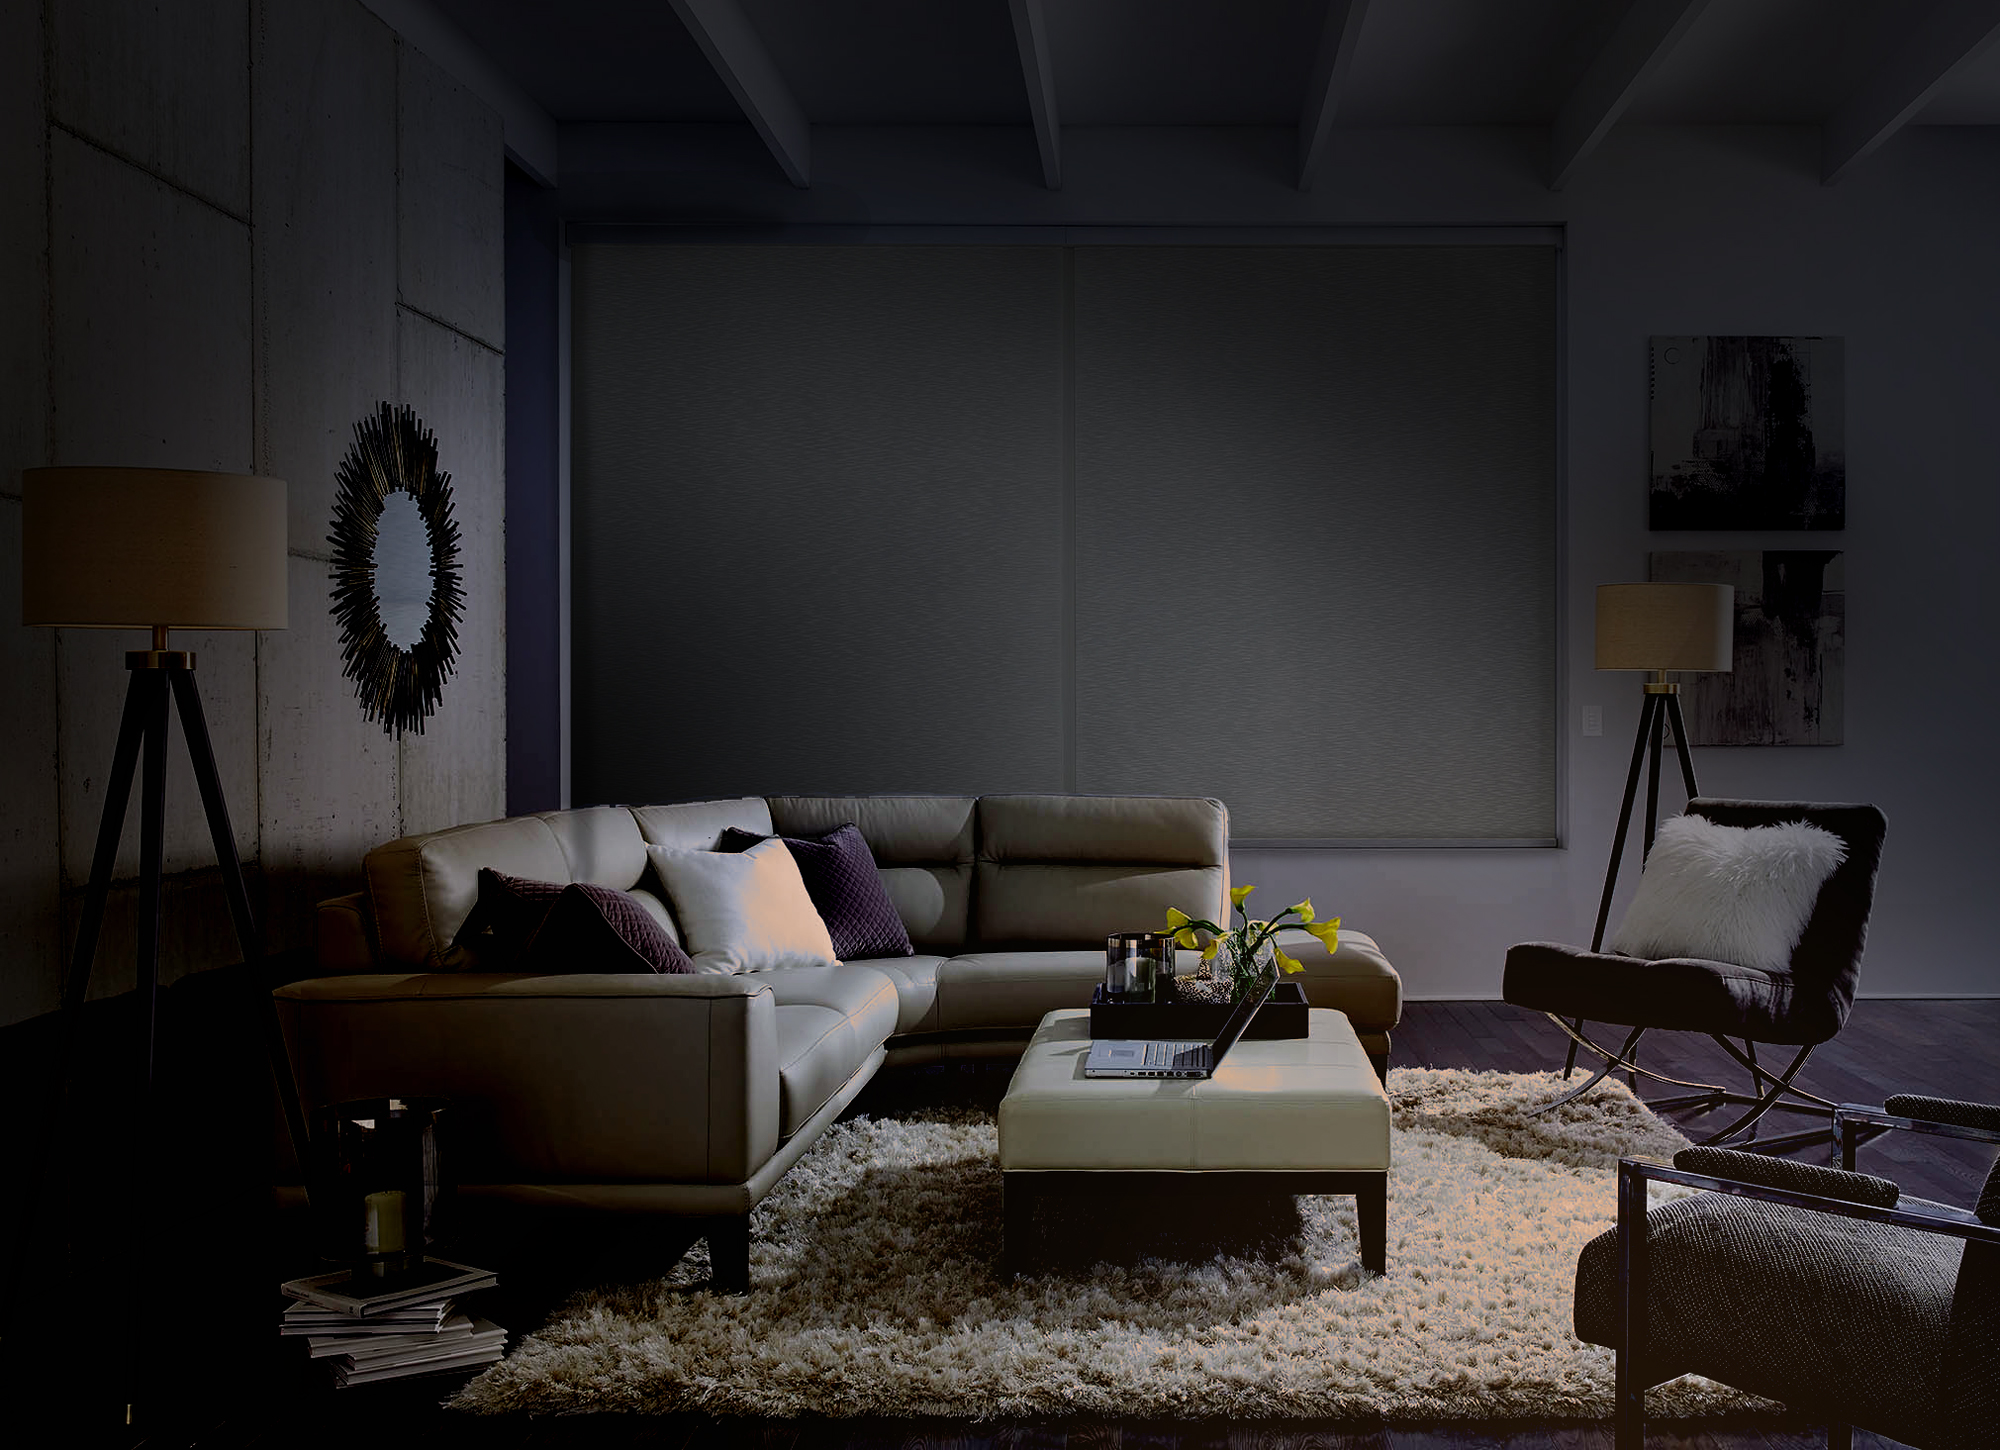 Living room with a Movie Night lighting setting